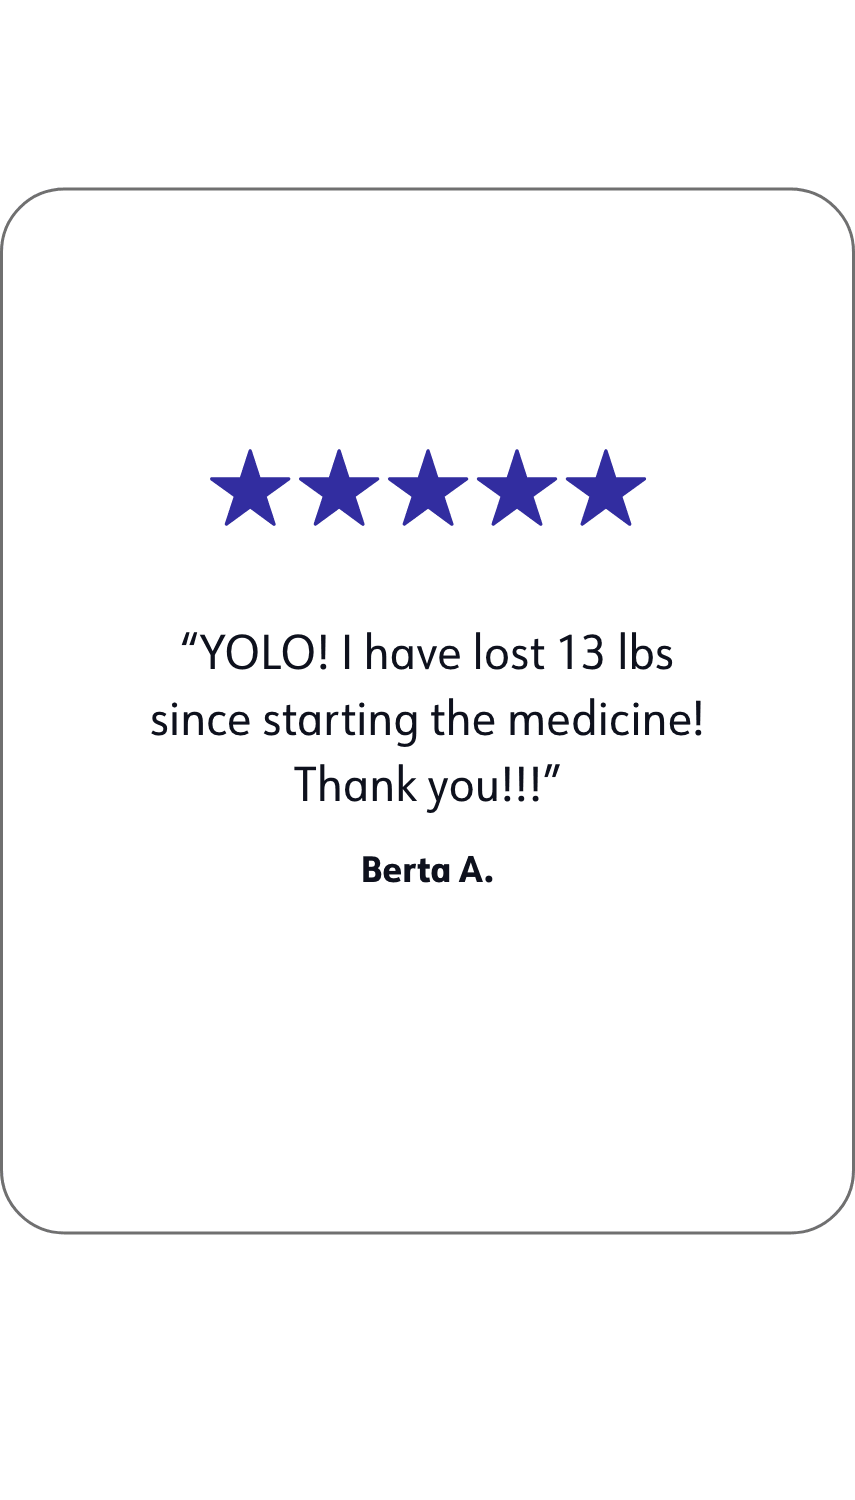 A quote of WW member Berta A. that says: YOLO! I have lost 13 lbs since starting the medicine! Thank you!!!